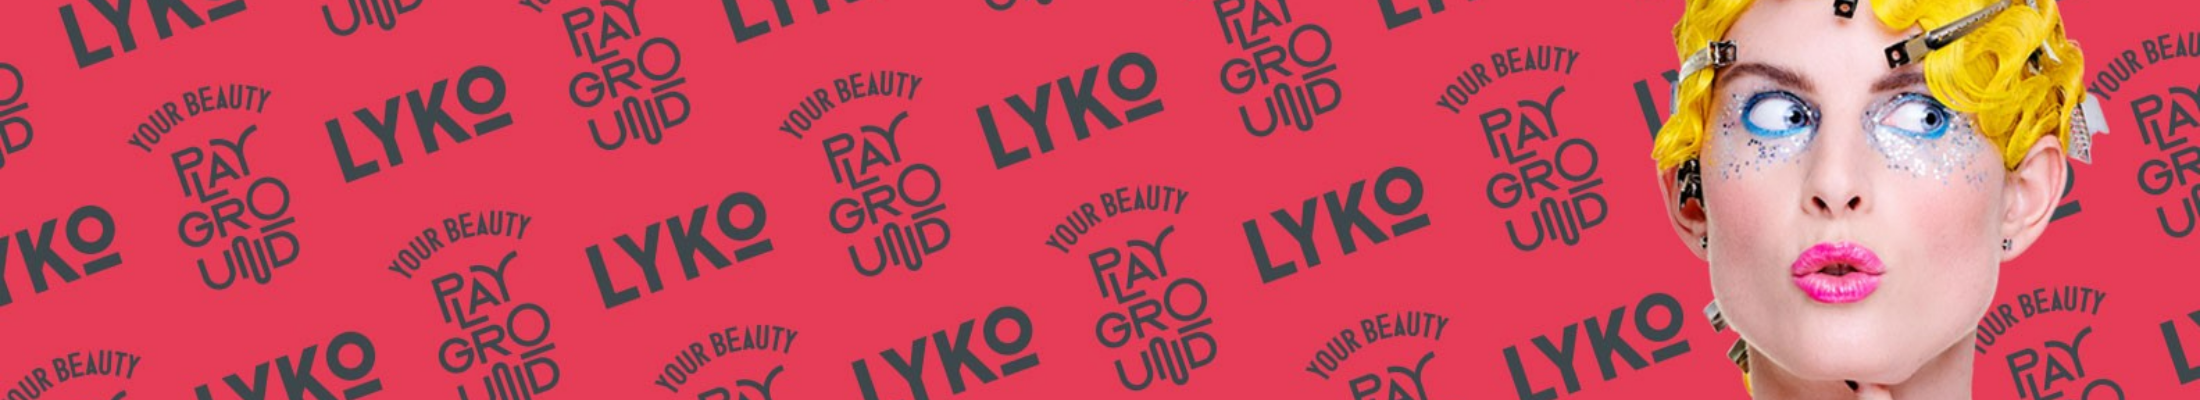 Lyko Group AB (publ)